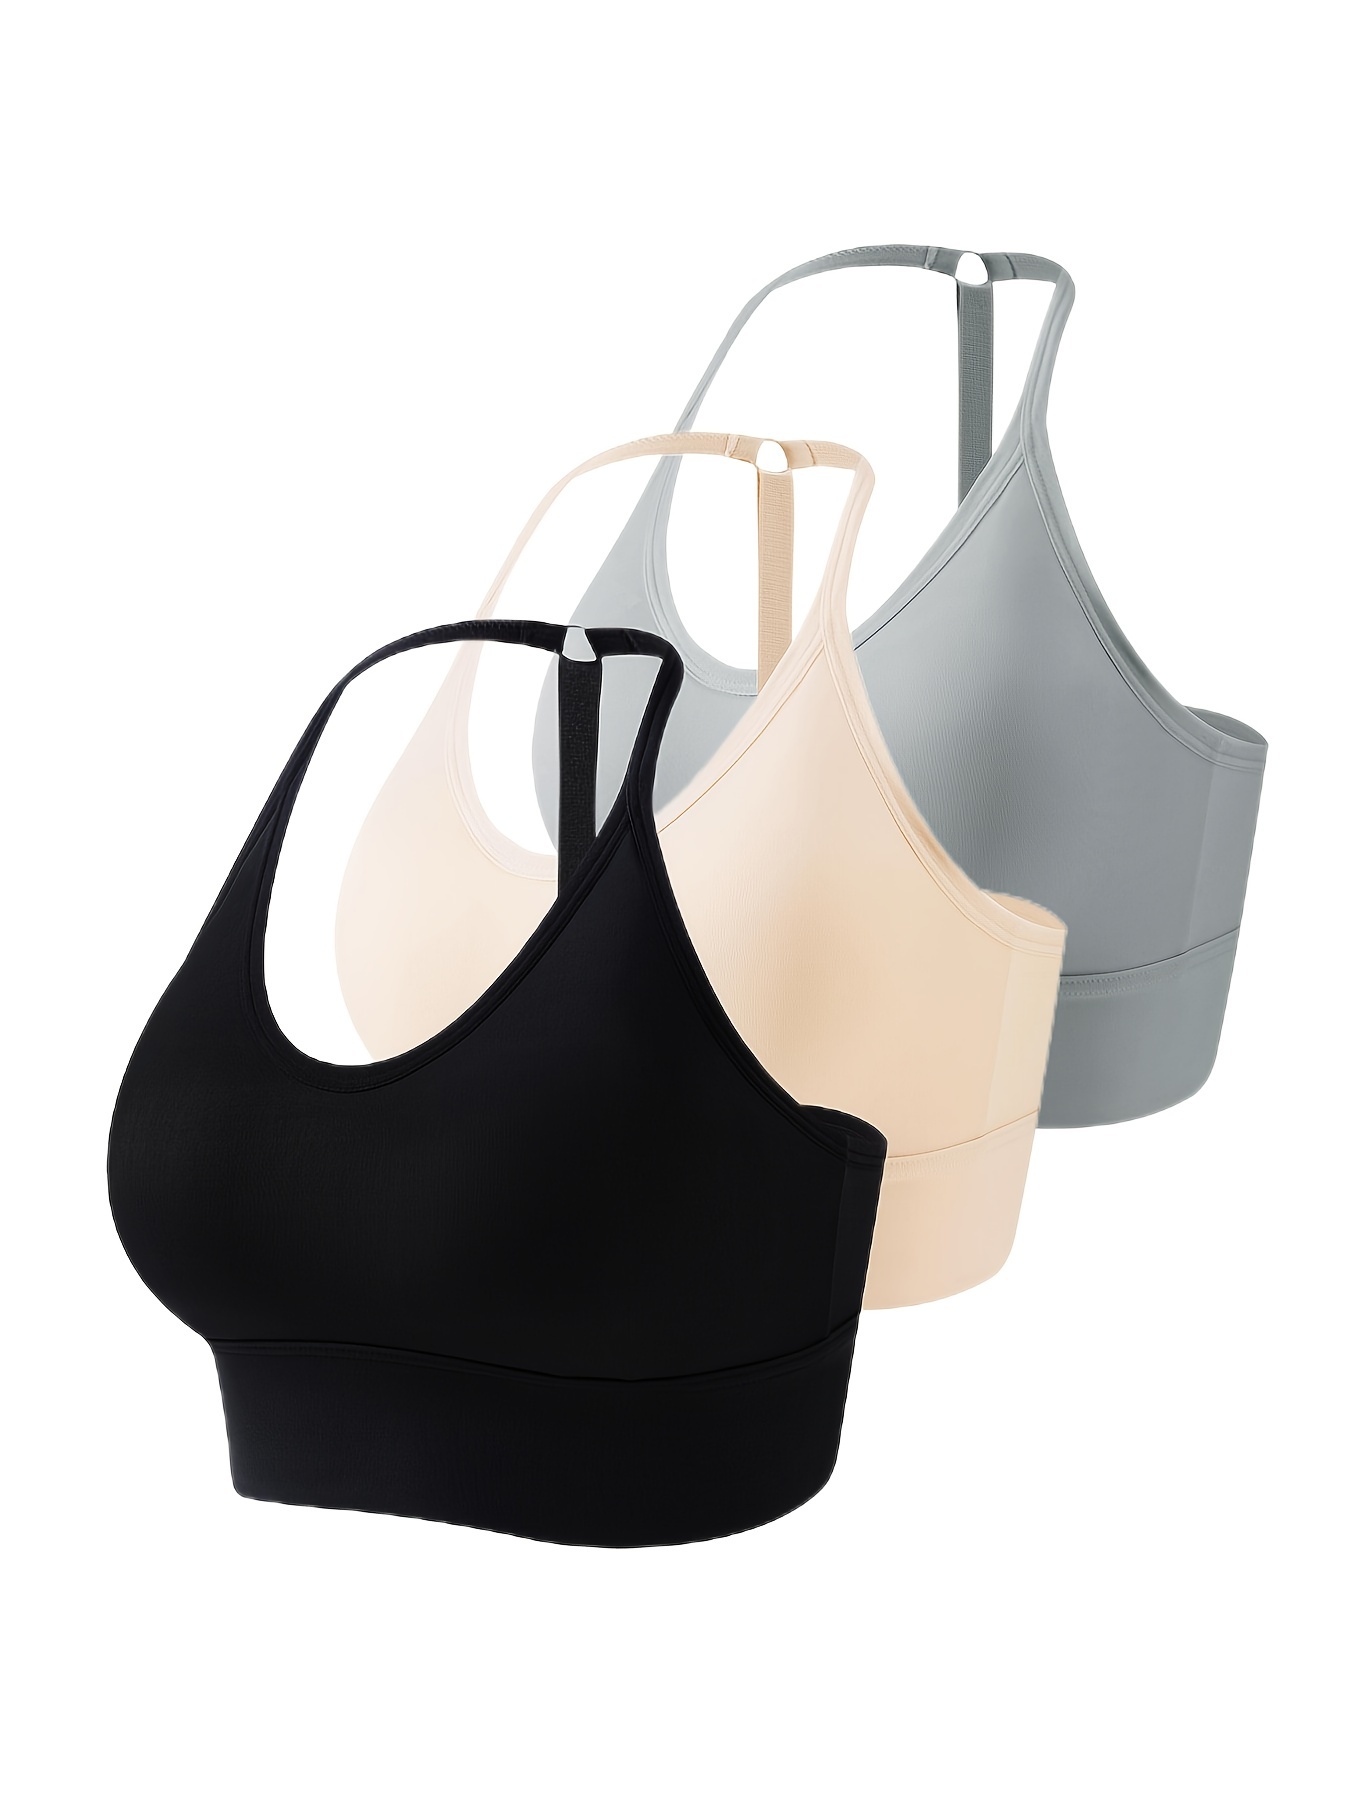 New Arrival 3pcs/set Sports Bra with Removable Pads Seamless